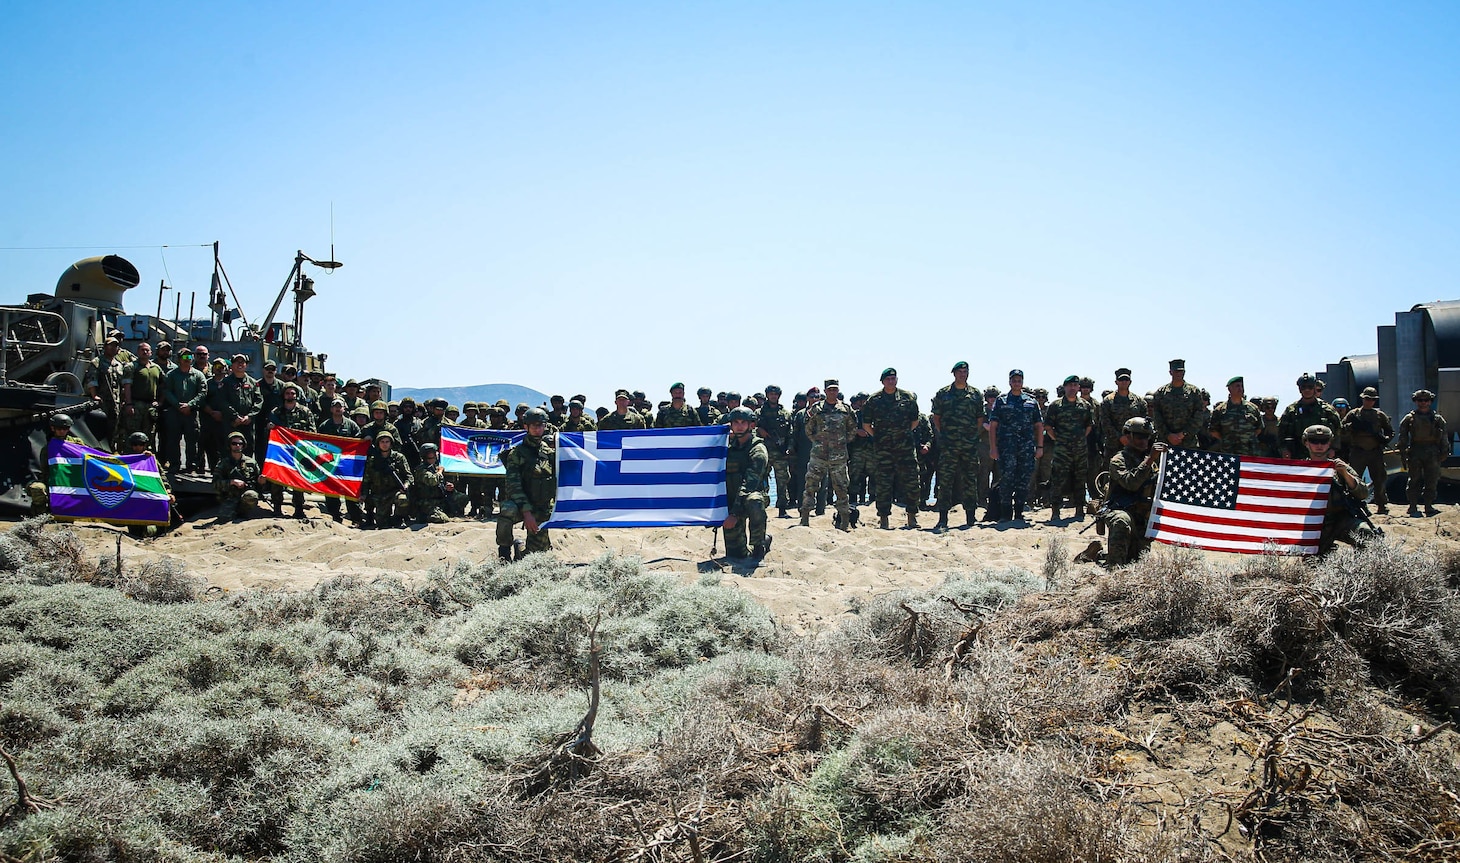 U.S. Marines assigned to Task Force 61/2, and Hellenic Marines with the 32nd Hellenic Marine Brigade pose for a photo during exercise Alexander the Great 22, Greece, May 17, 2022. Alexander the Great 22 strengthens interoperability and force readiness between the U.S., Greece, and Allied nations, enhancing strategic defense and partnership while promoting security and stability in the region. (U.S. Marine Corps photo by Lance Cpl. Ethan Robert Jones)